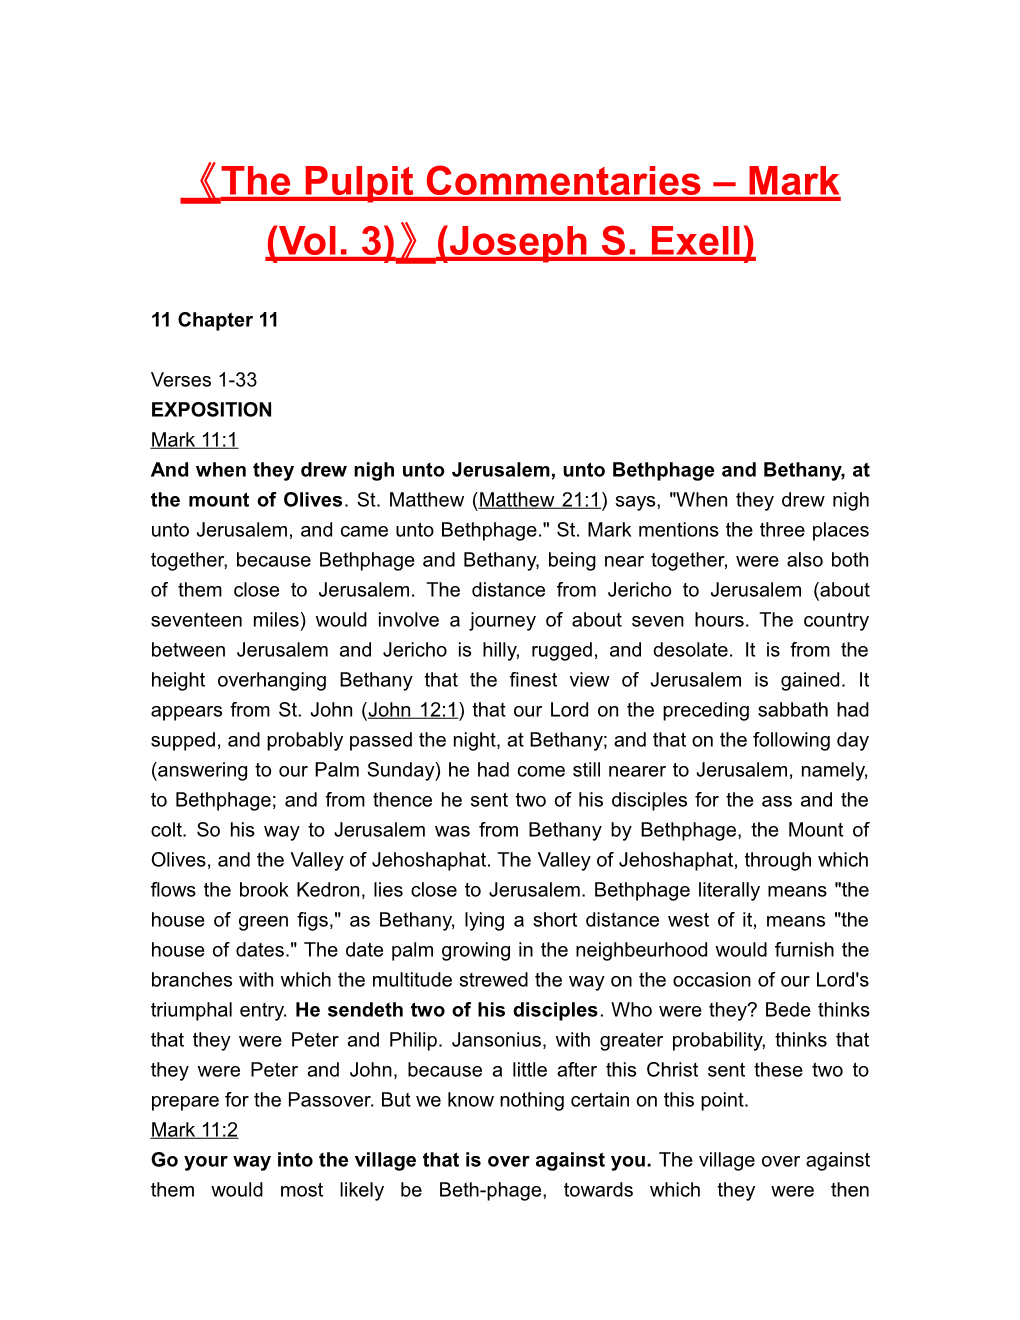 The Pulpit Commentaries Mark (Vol. 3) (Joseph S. Exell)